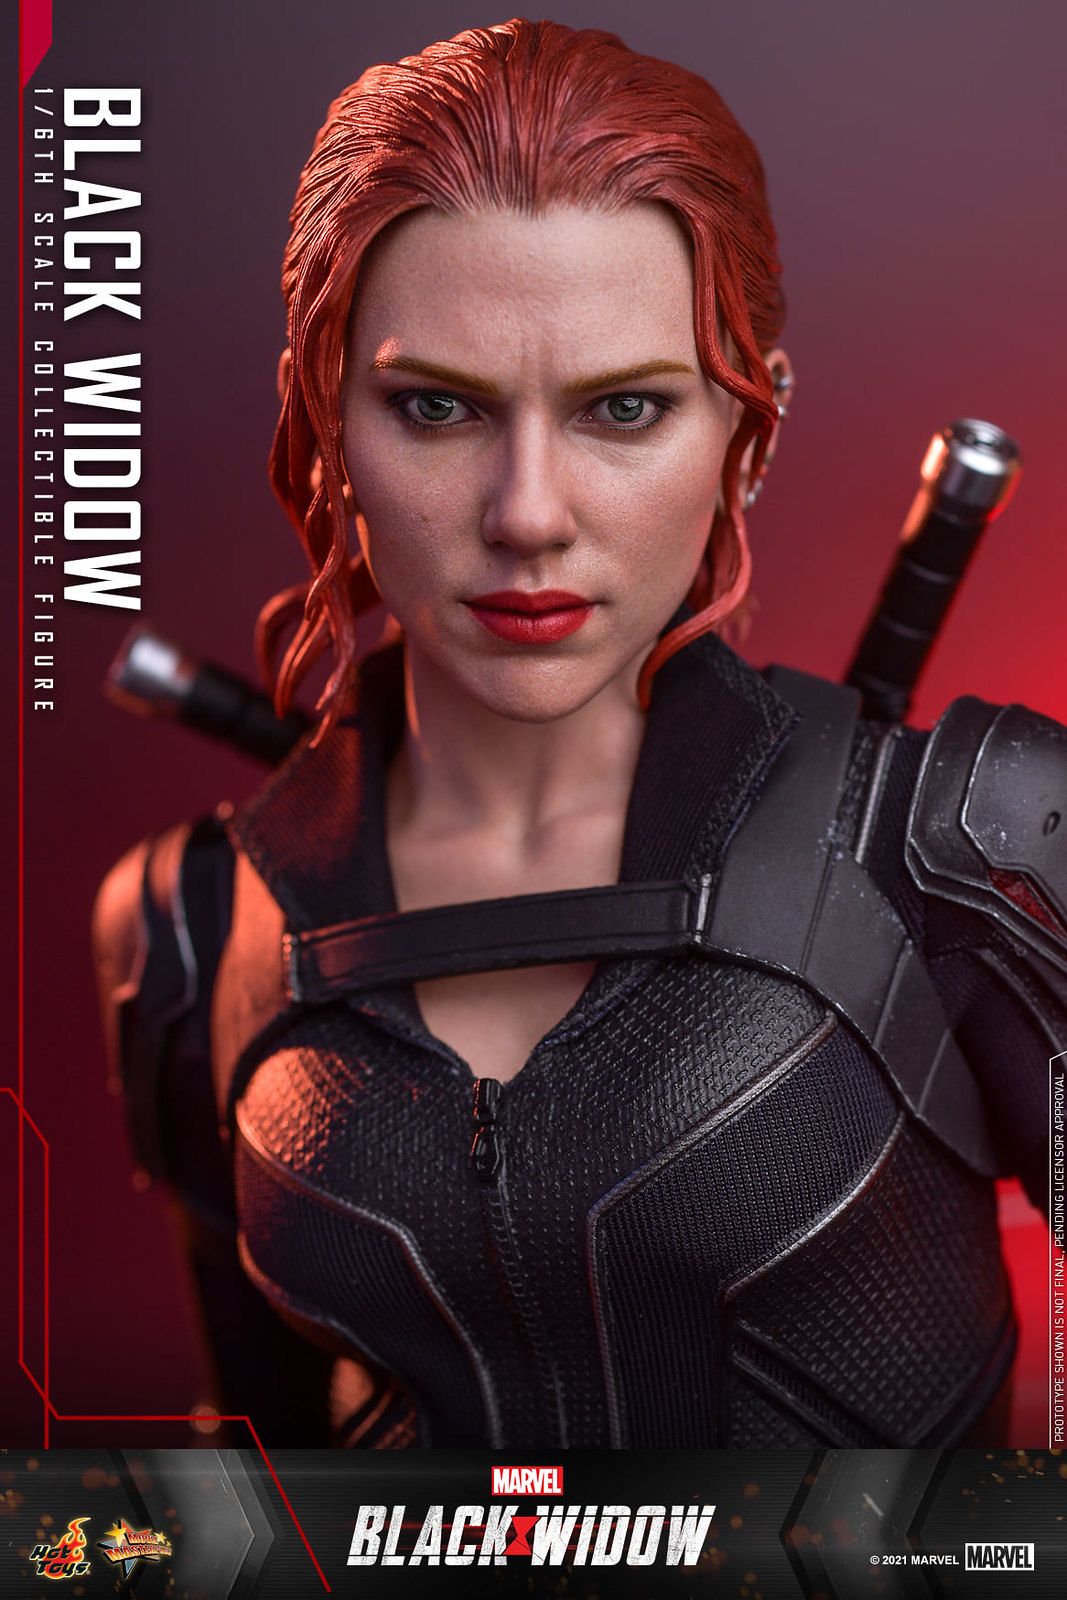 NEW PRODUCT: Hot Toys Black Widow - 1/6th scale Black Widow Collectible Figure 51311278921_36334aa5d4_h